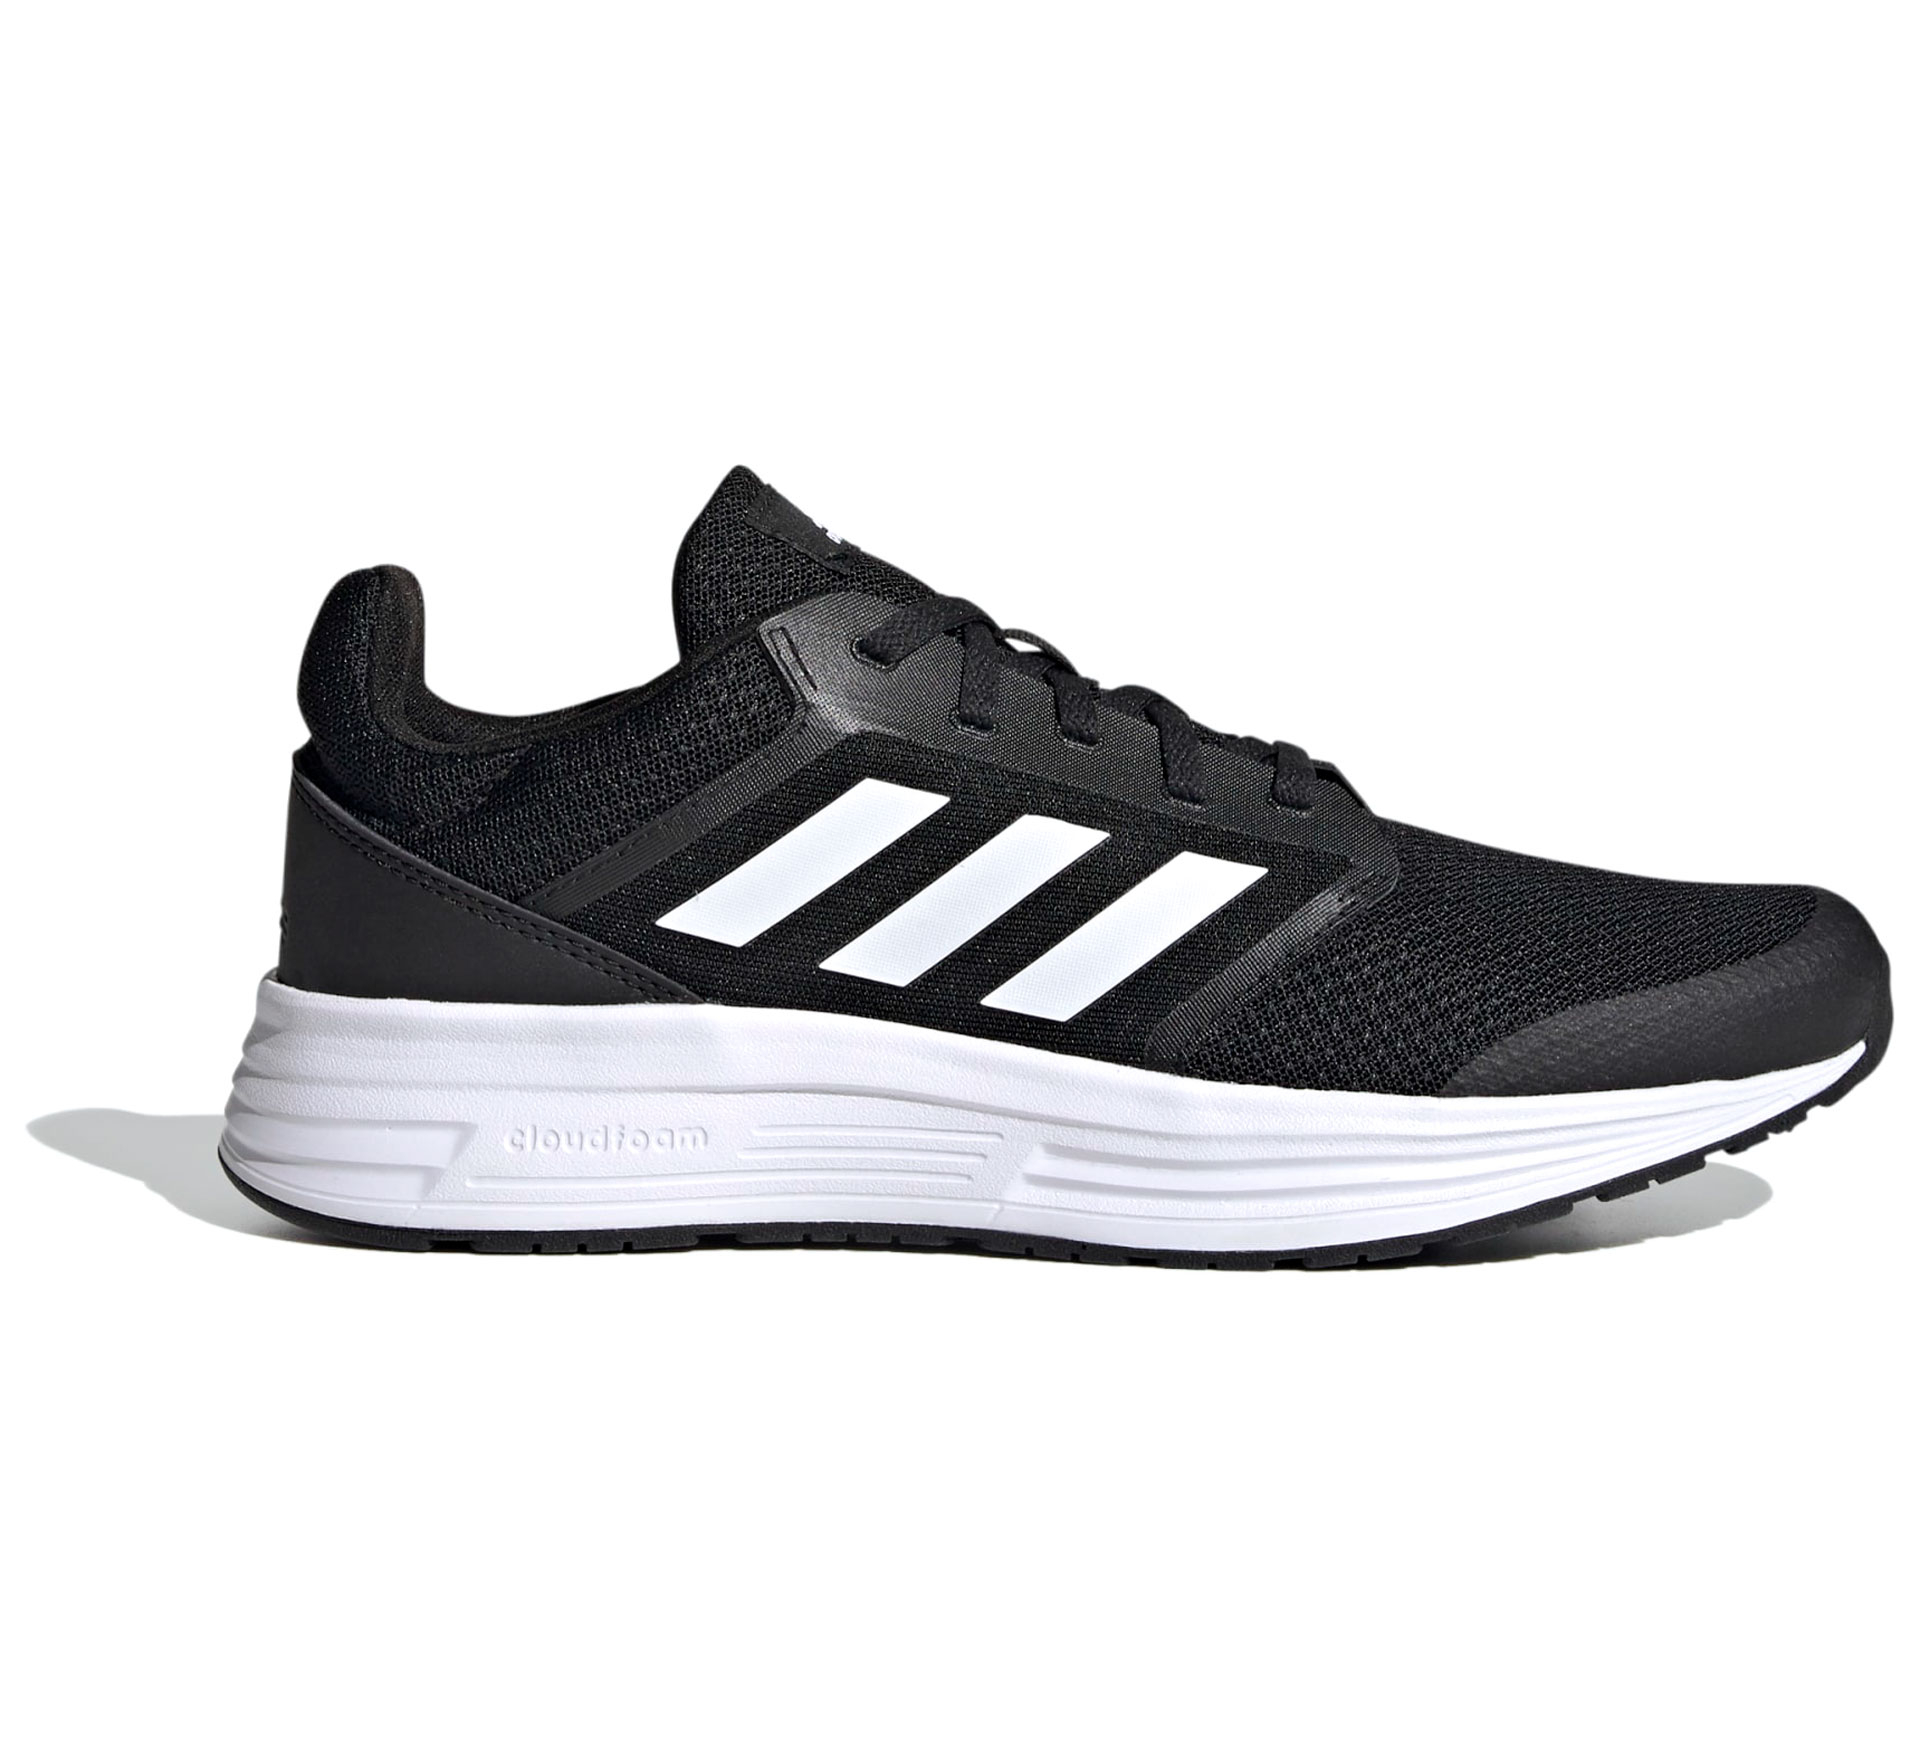 Chaussures de course Adidas Galaxy 5 Homme